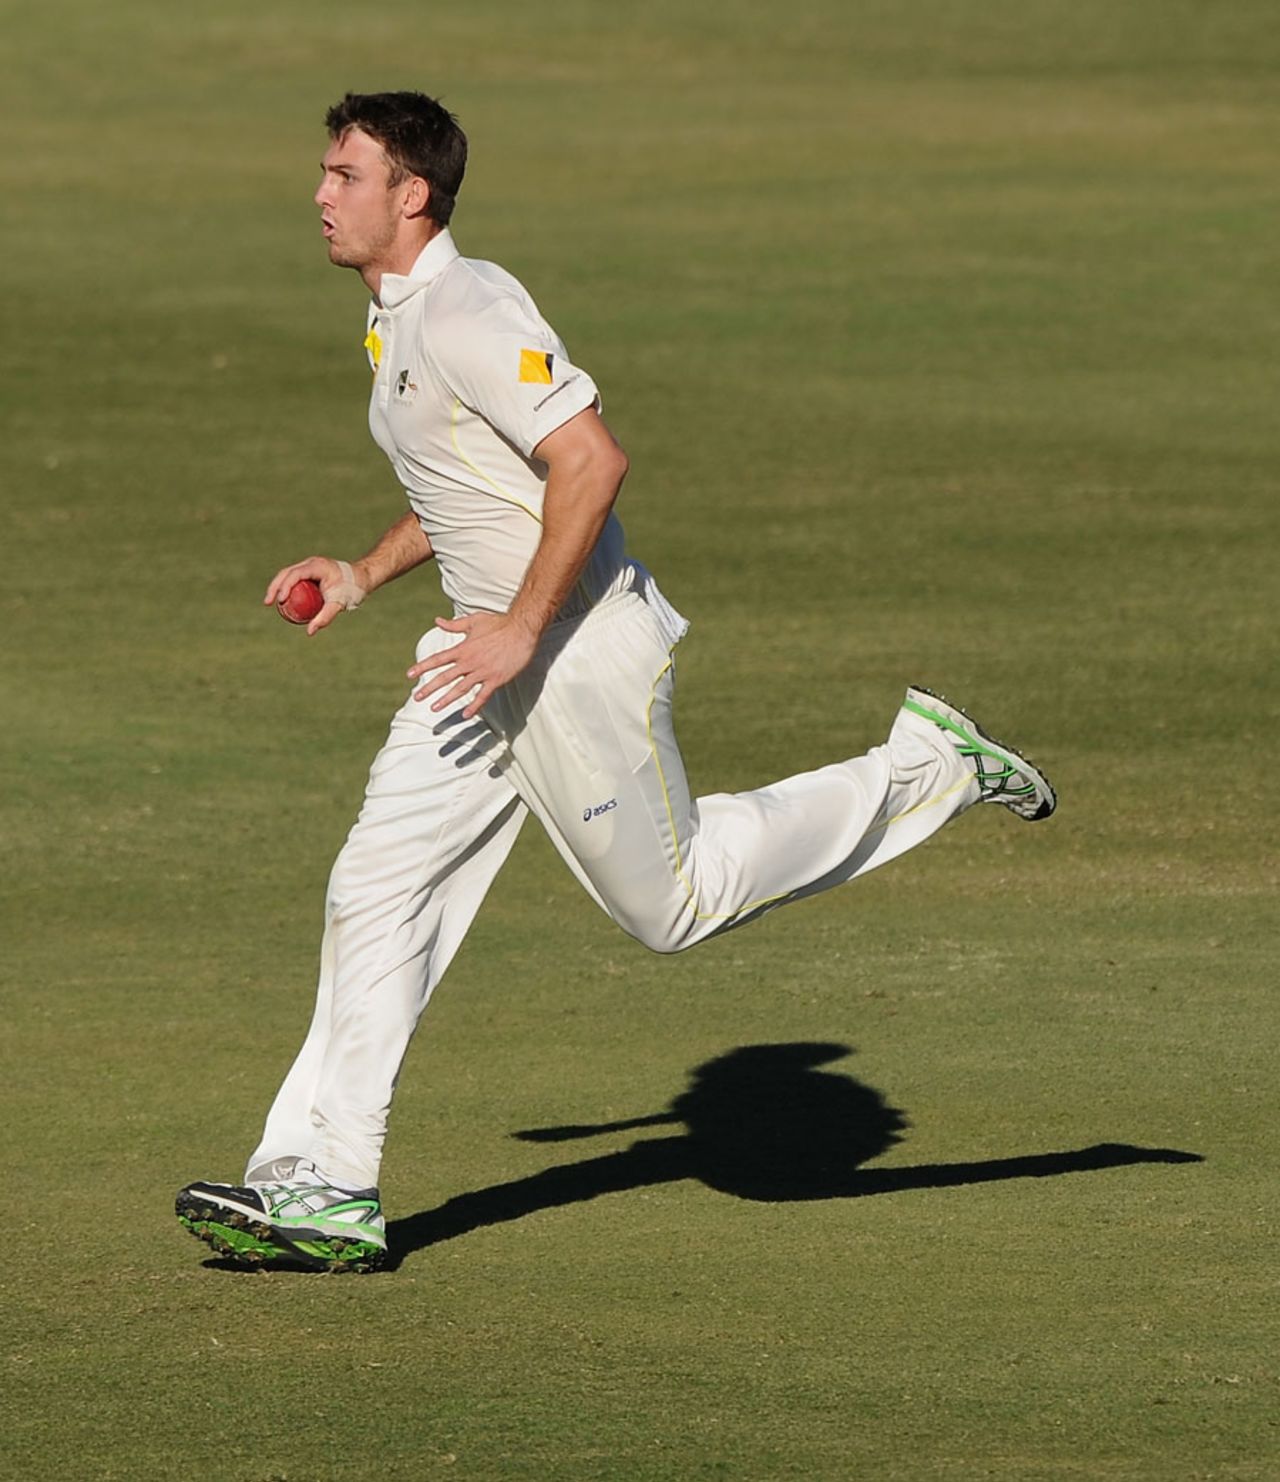 Mitchell Marsh runs in to bowl,  Australia A v India A, 1st unofficial Test, Brisbane, 1st day, July 6, 2014